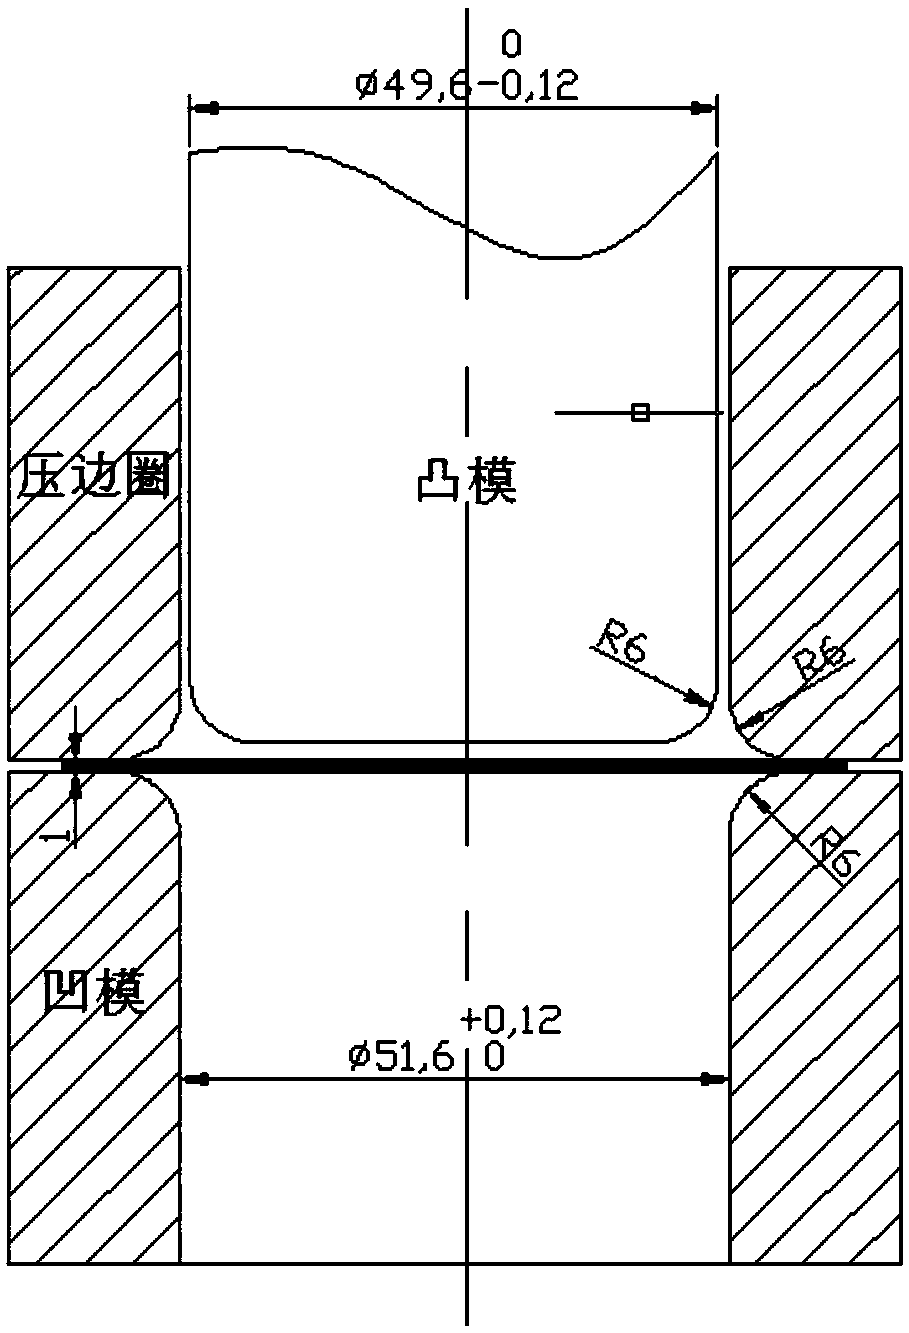 Al-Mg-Si-Cu-Zr-Er alloy having excellent stamping formation performance and preparation method thereof